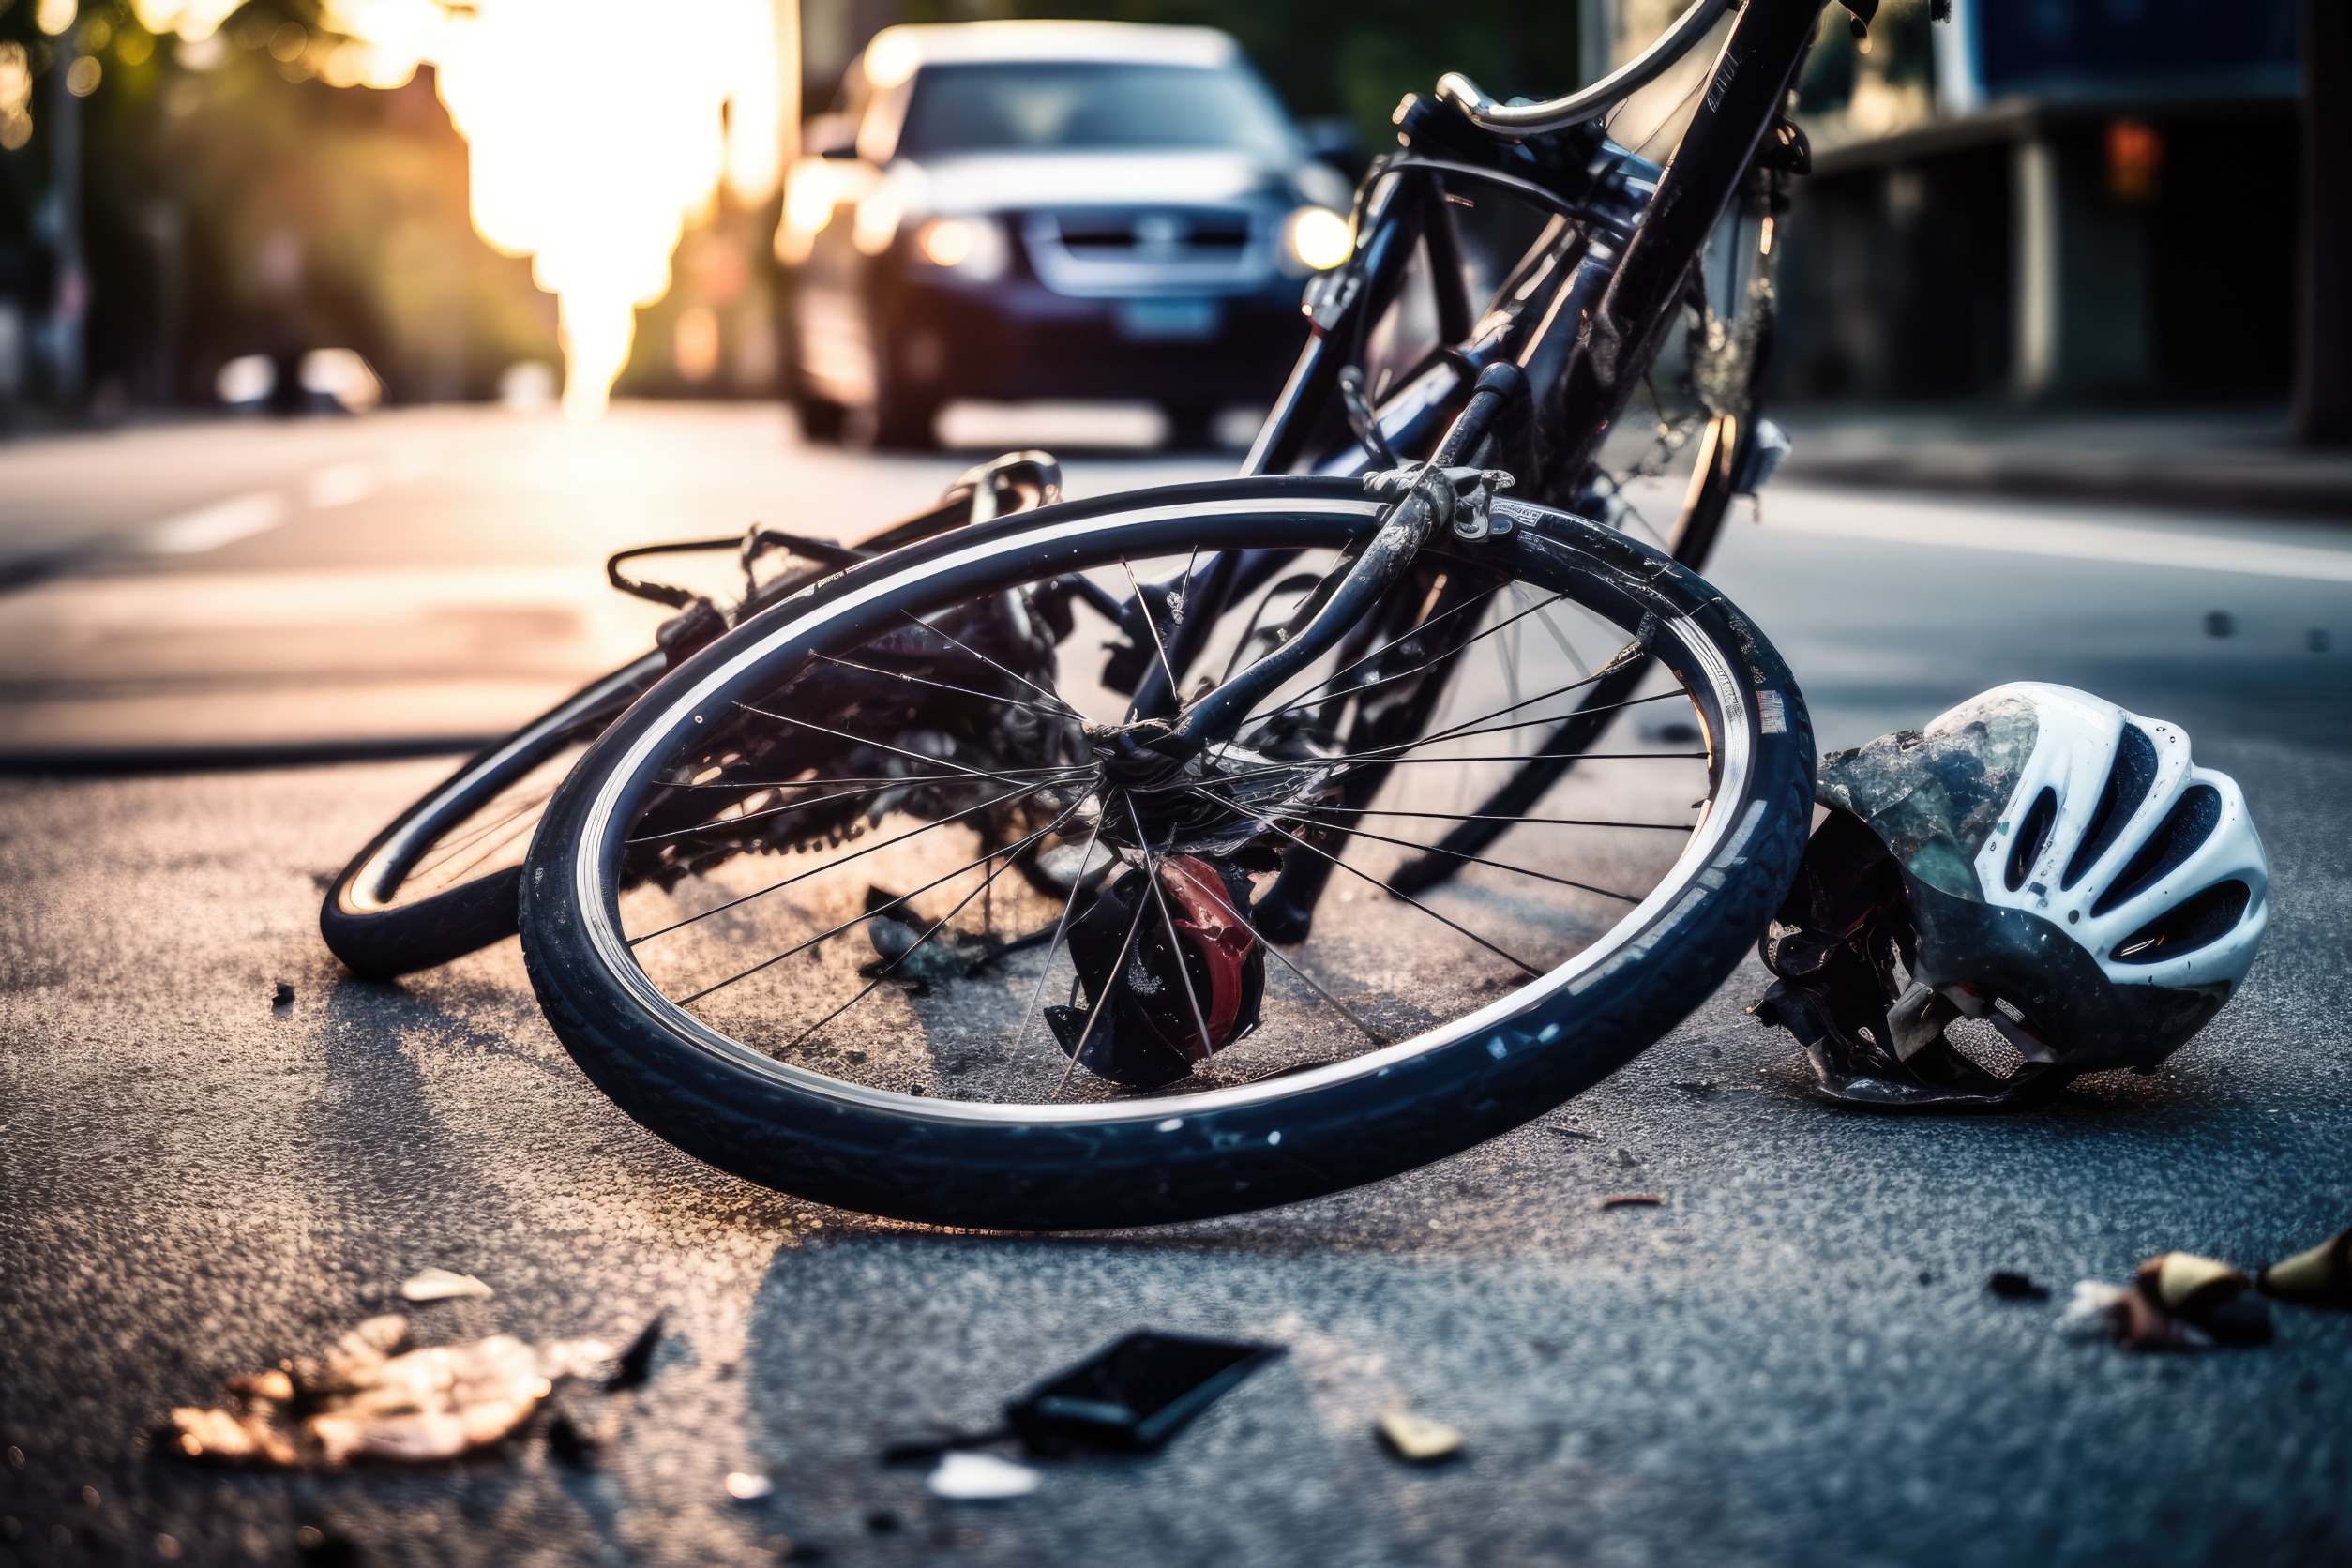 How to avoid the most common Florida bicycle accidents